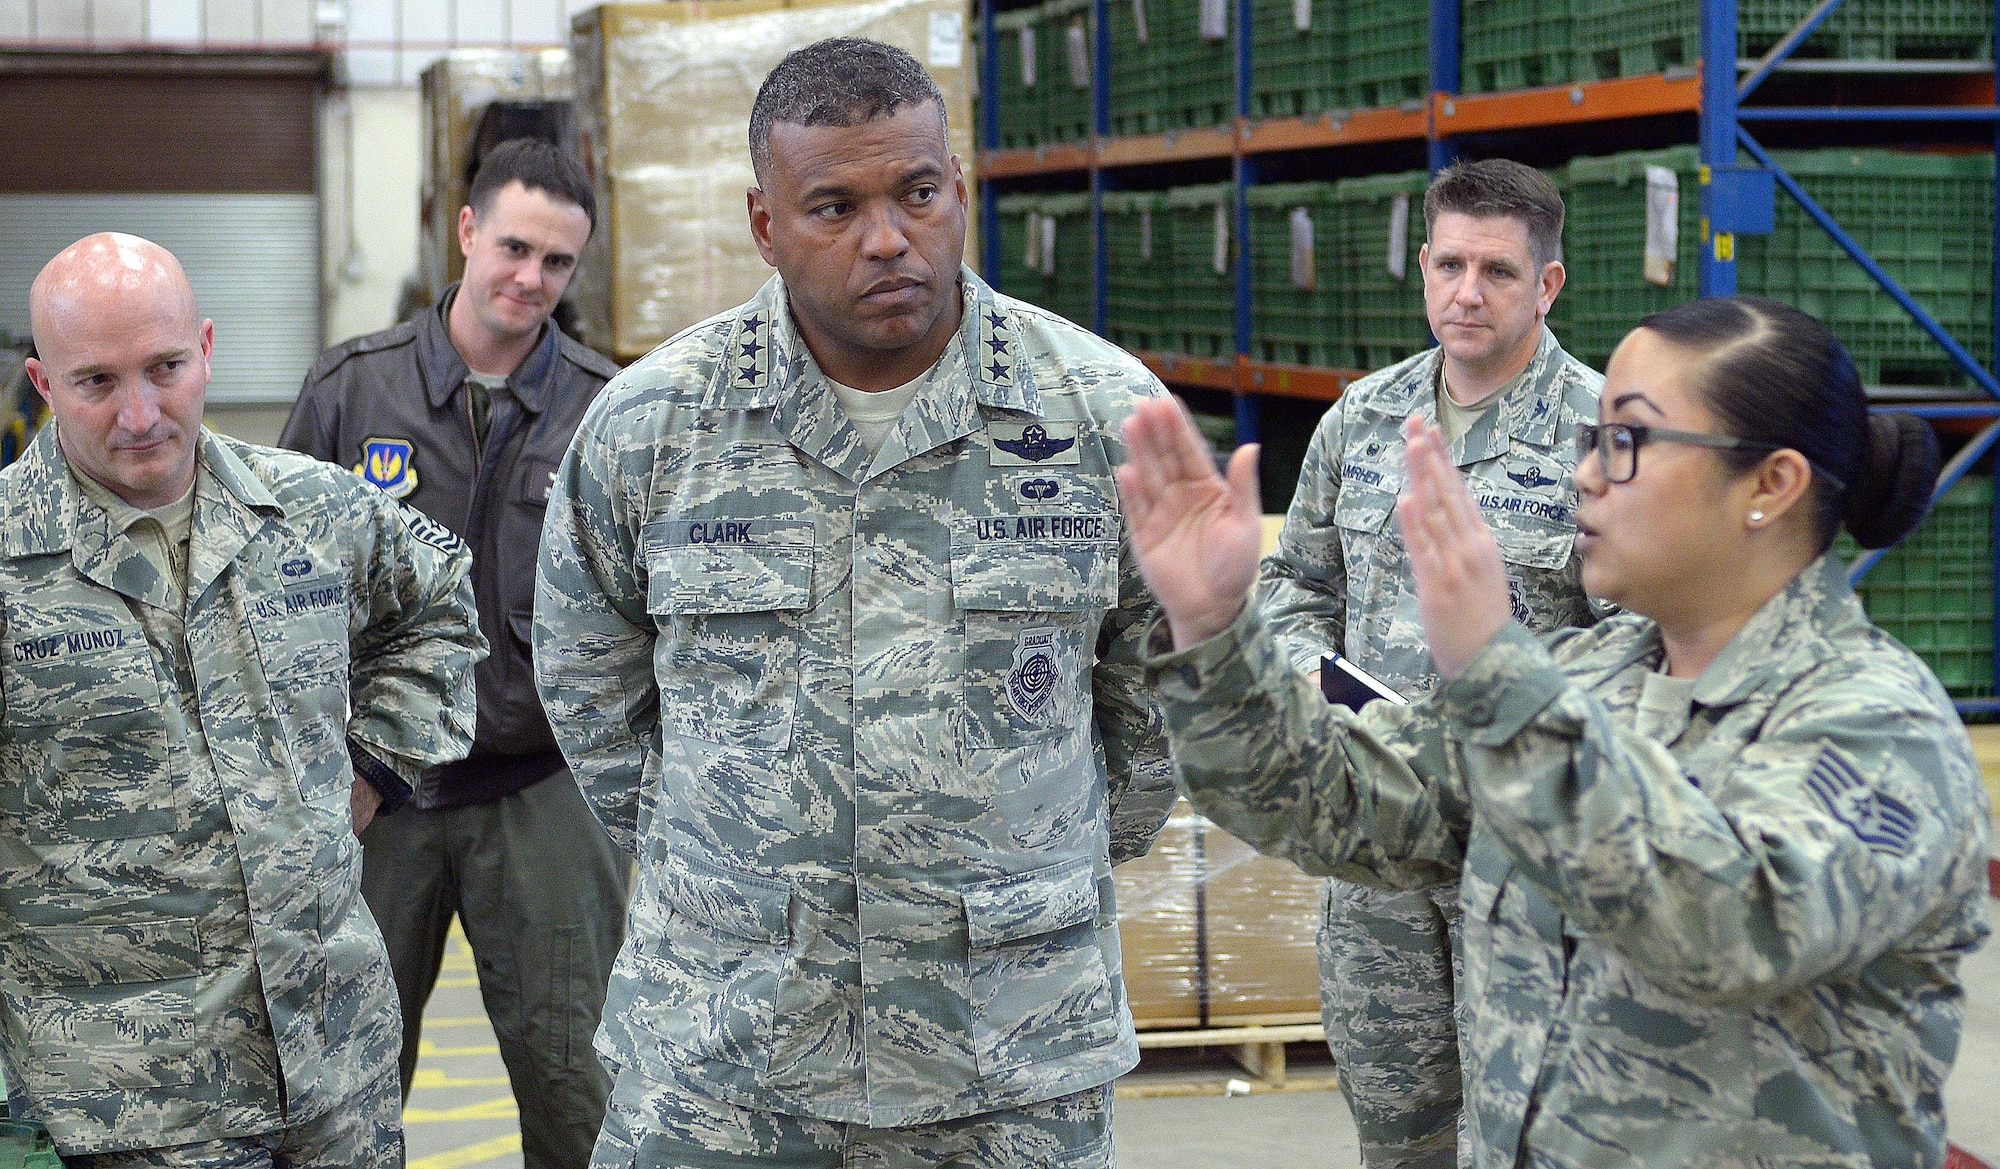 U.S. Air Force Lt. Gen. Richard M. Clark, 3rd Air Force commander, toured the 100th Logistics Readiness Squadron Nov. 6, 2017, on RAF Mildenhall, England. Clark listened as Staff Sgt. Tiani Talledo, 100th LRS individual protective equipment Supervisor, described the innovations they have made for deployment readiness. (U.S. Air Force photo by Airman 1st Class Benjamin Cooper)